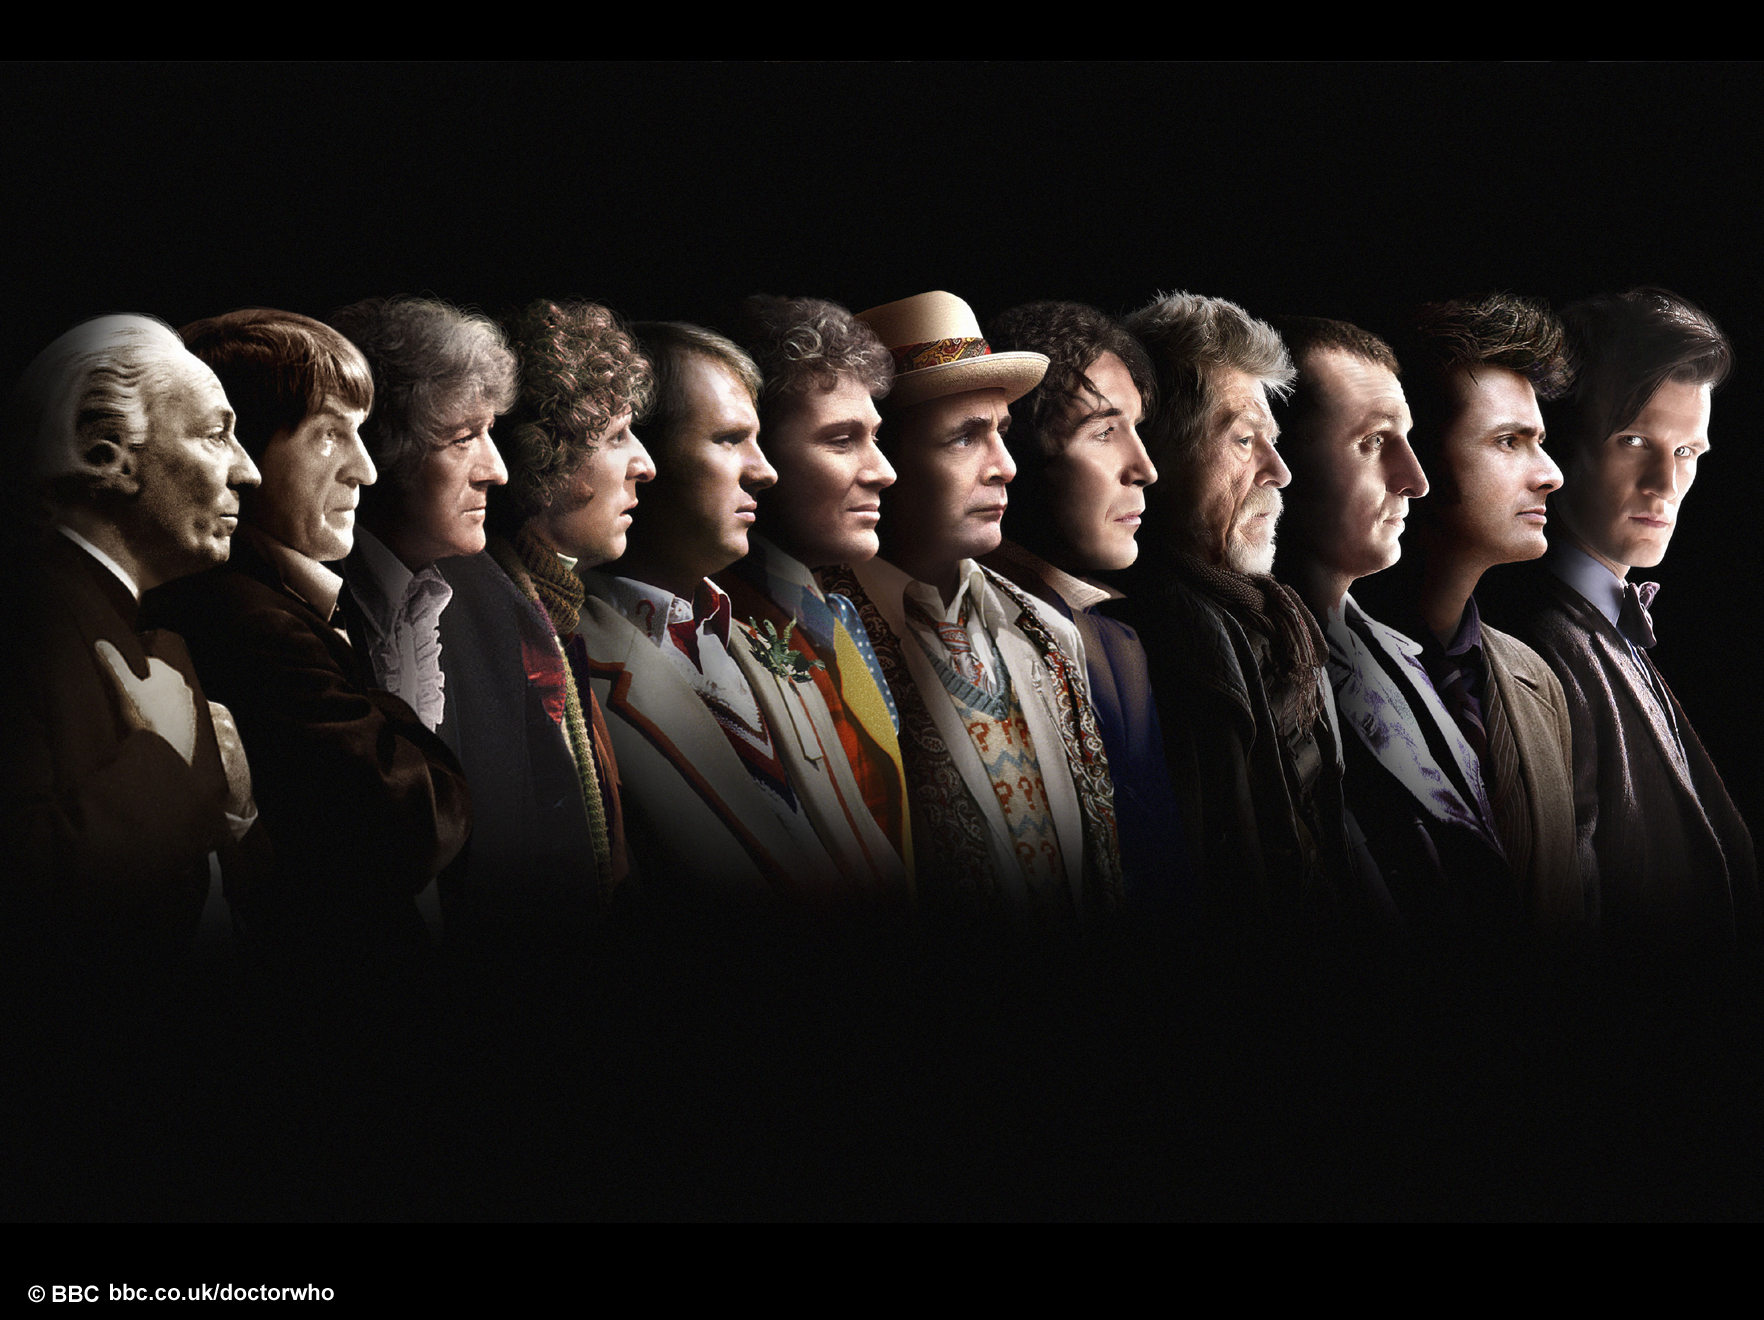 Versions Of These Amazing Doctor Who Wallpaper